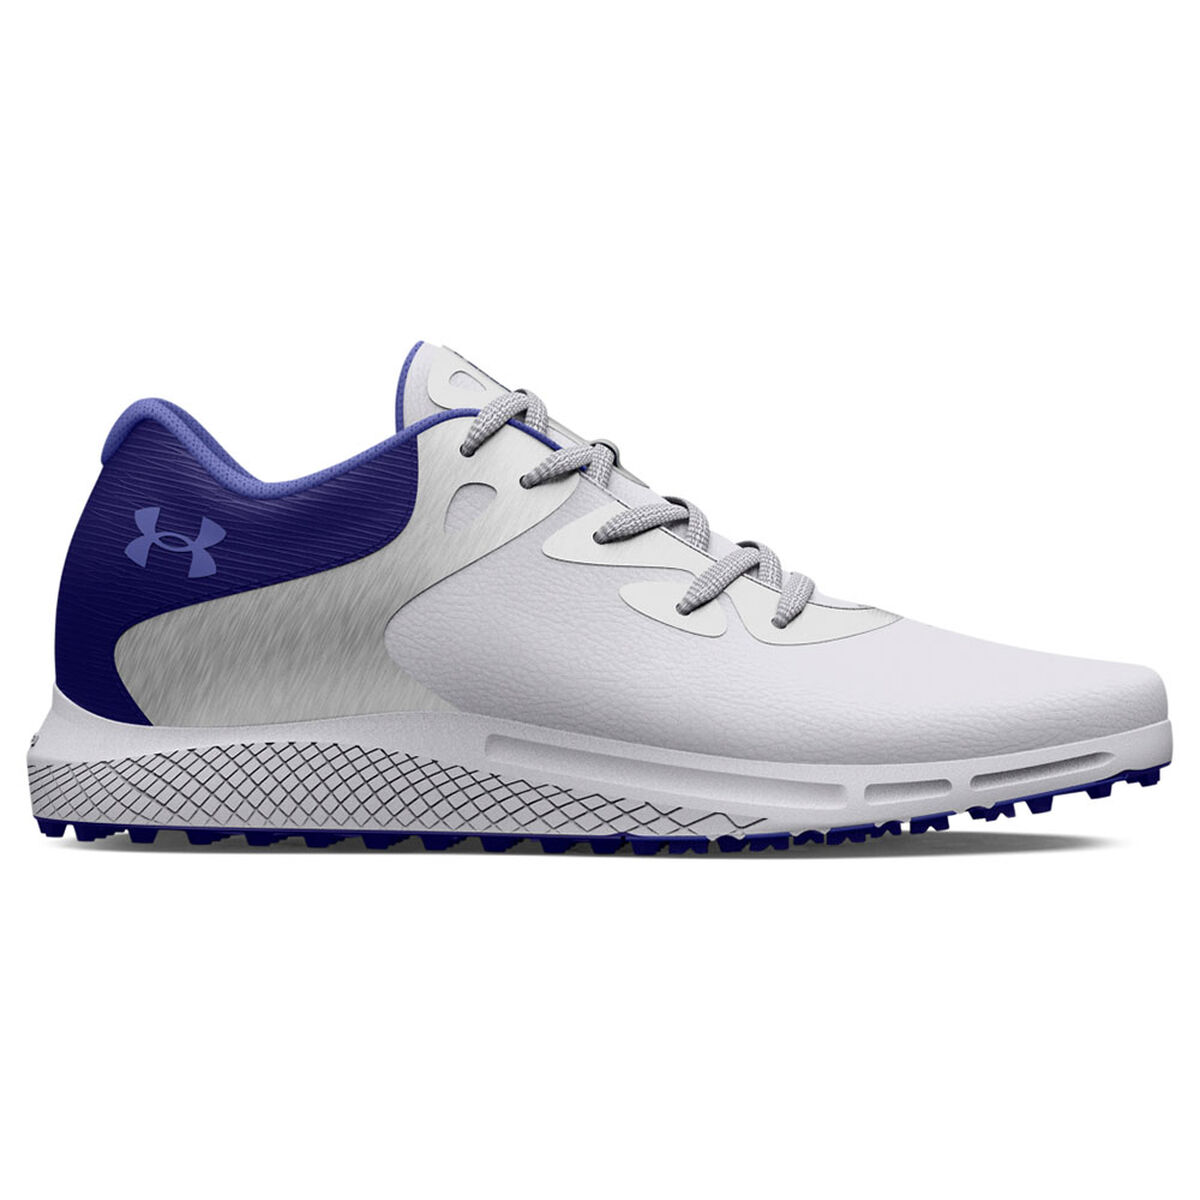 Under Armour Ladies Grey and Blue Comfortable Charged Breathe 2 Spikeless Golf Shoes, Size: 5.5 | American Golf von Under Armour